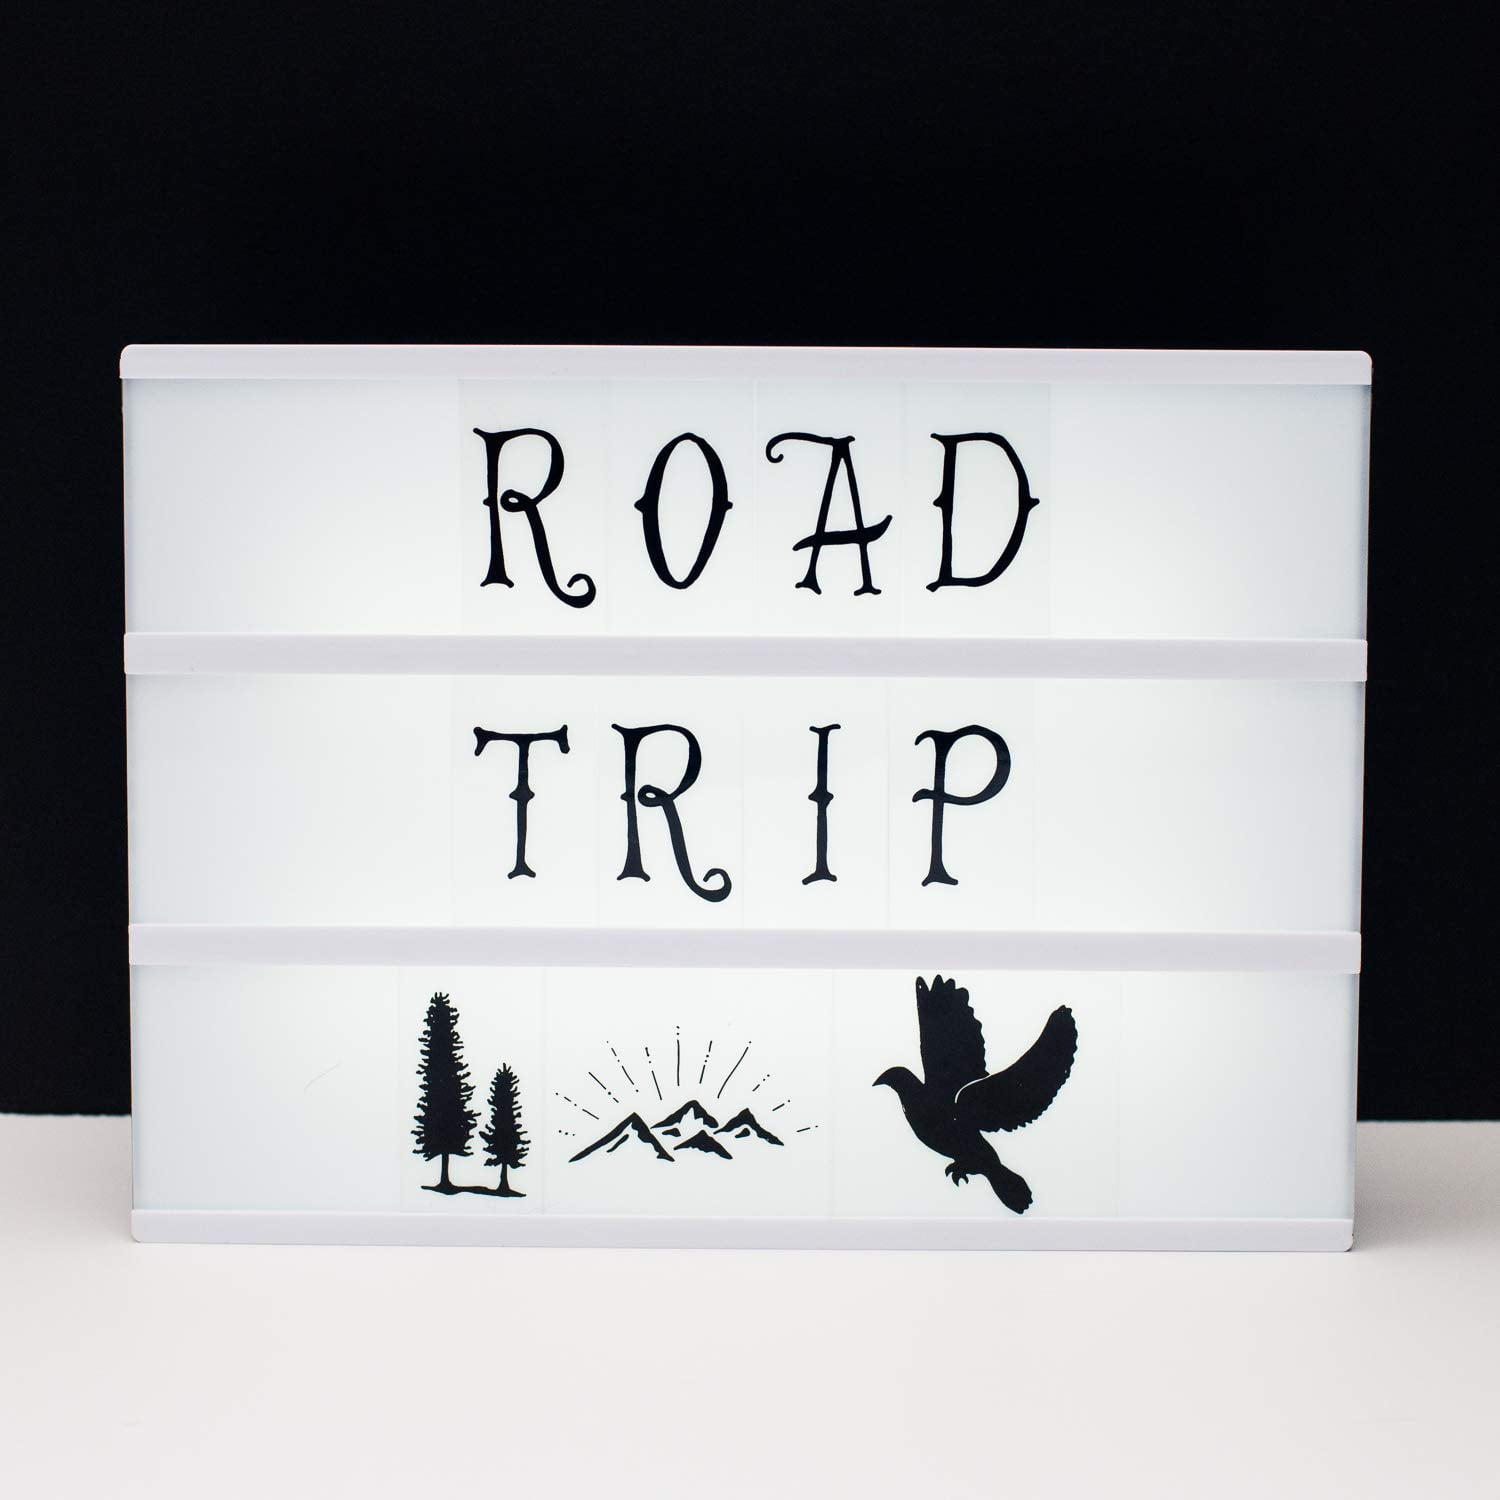 Extra Letter Sets For Lightbox By Idyll Home